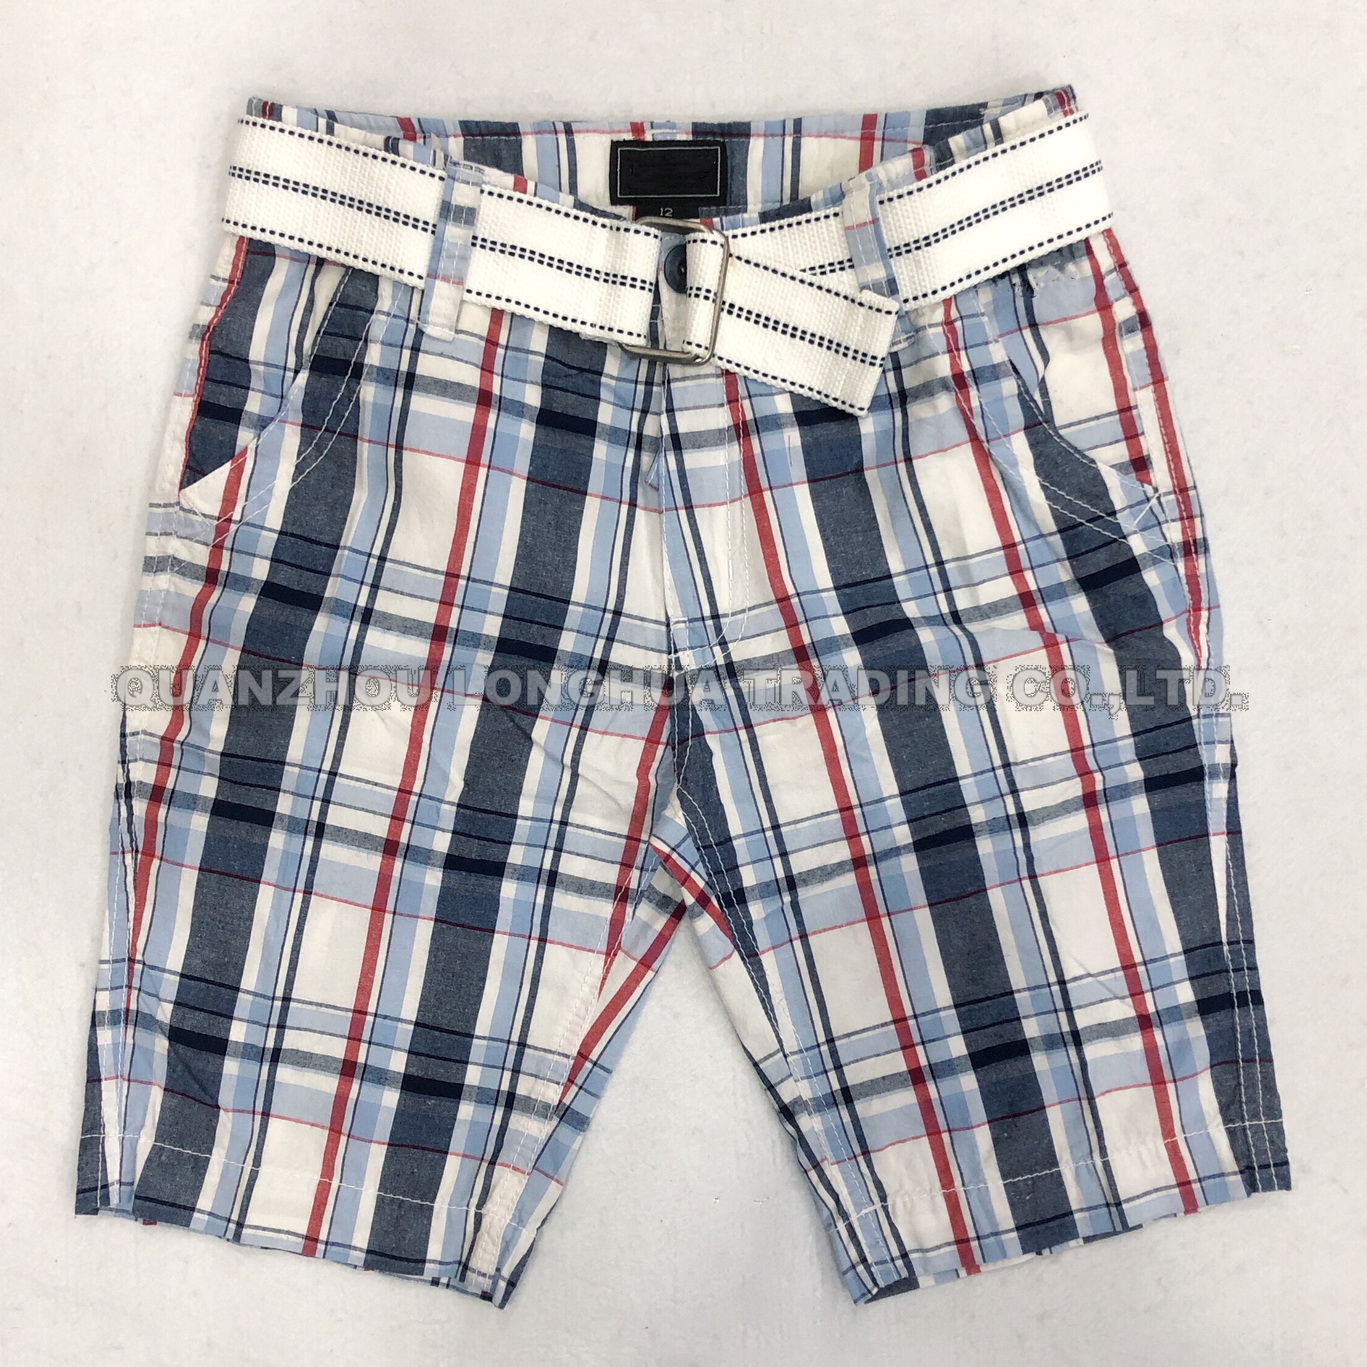 Men′s Boy′s Cargo Shorts Pants Apparel Trousers Printing Cotton Enzym Wash Plaid with Belt